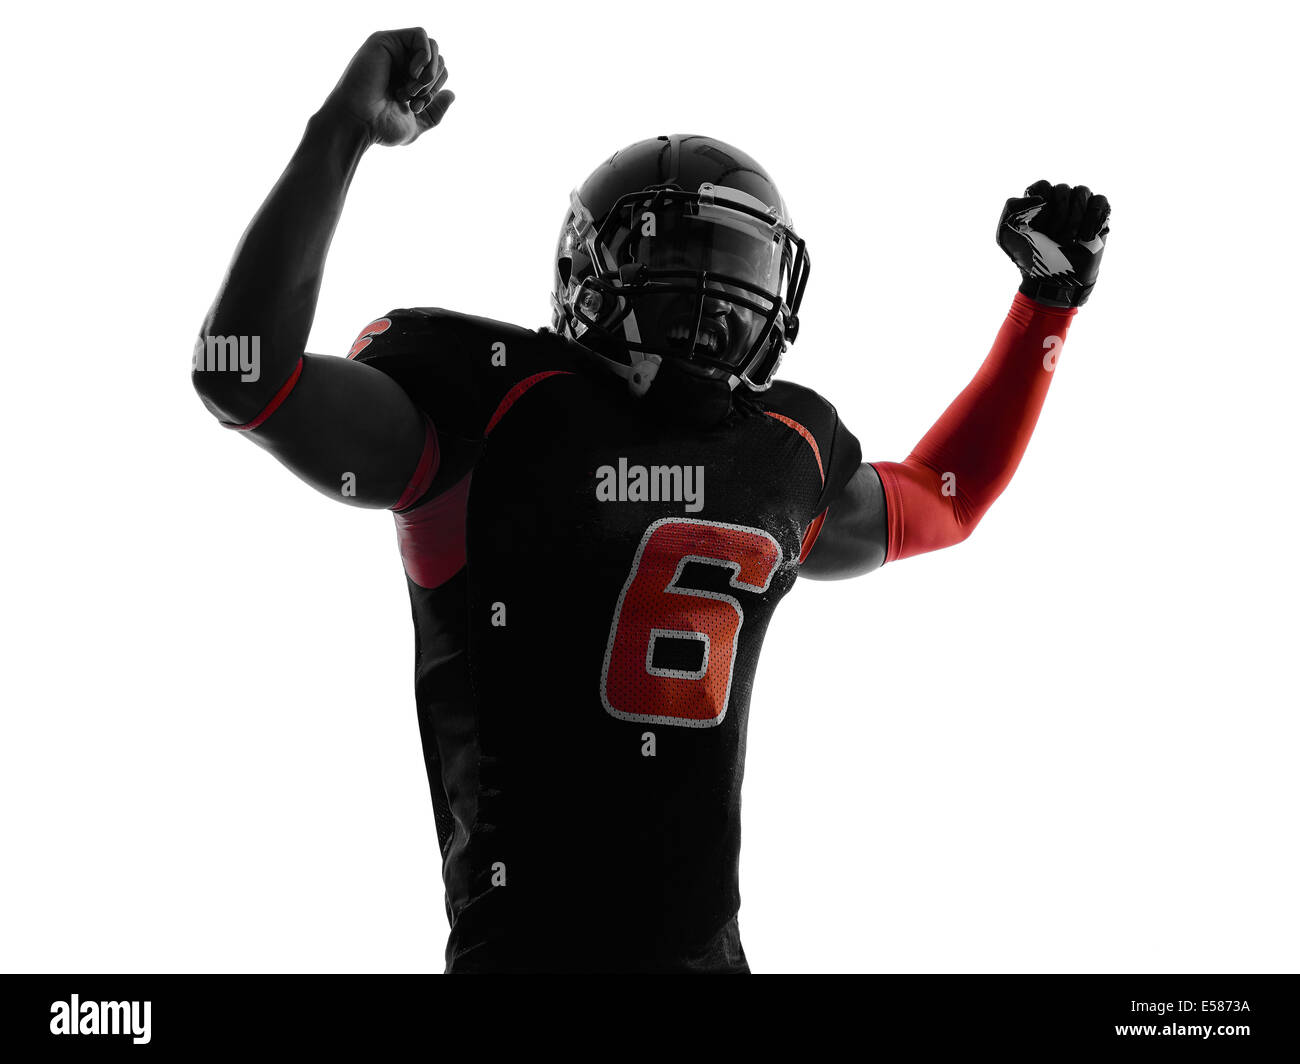 one american football player arms raised portrait in silhouette shadow on white background Stock Photo